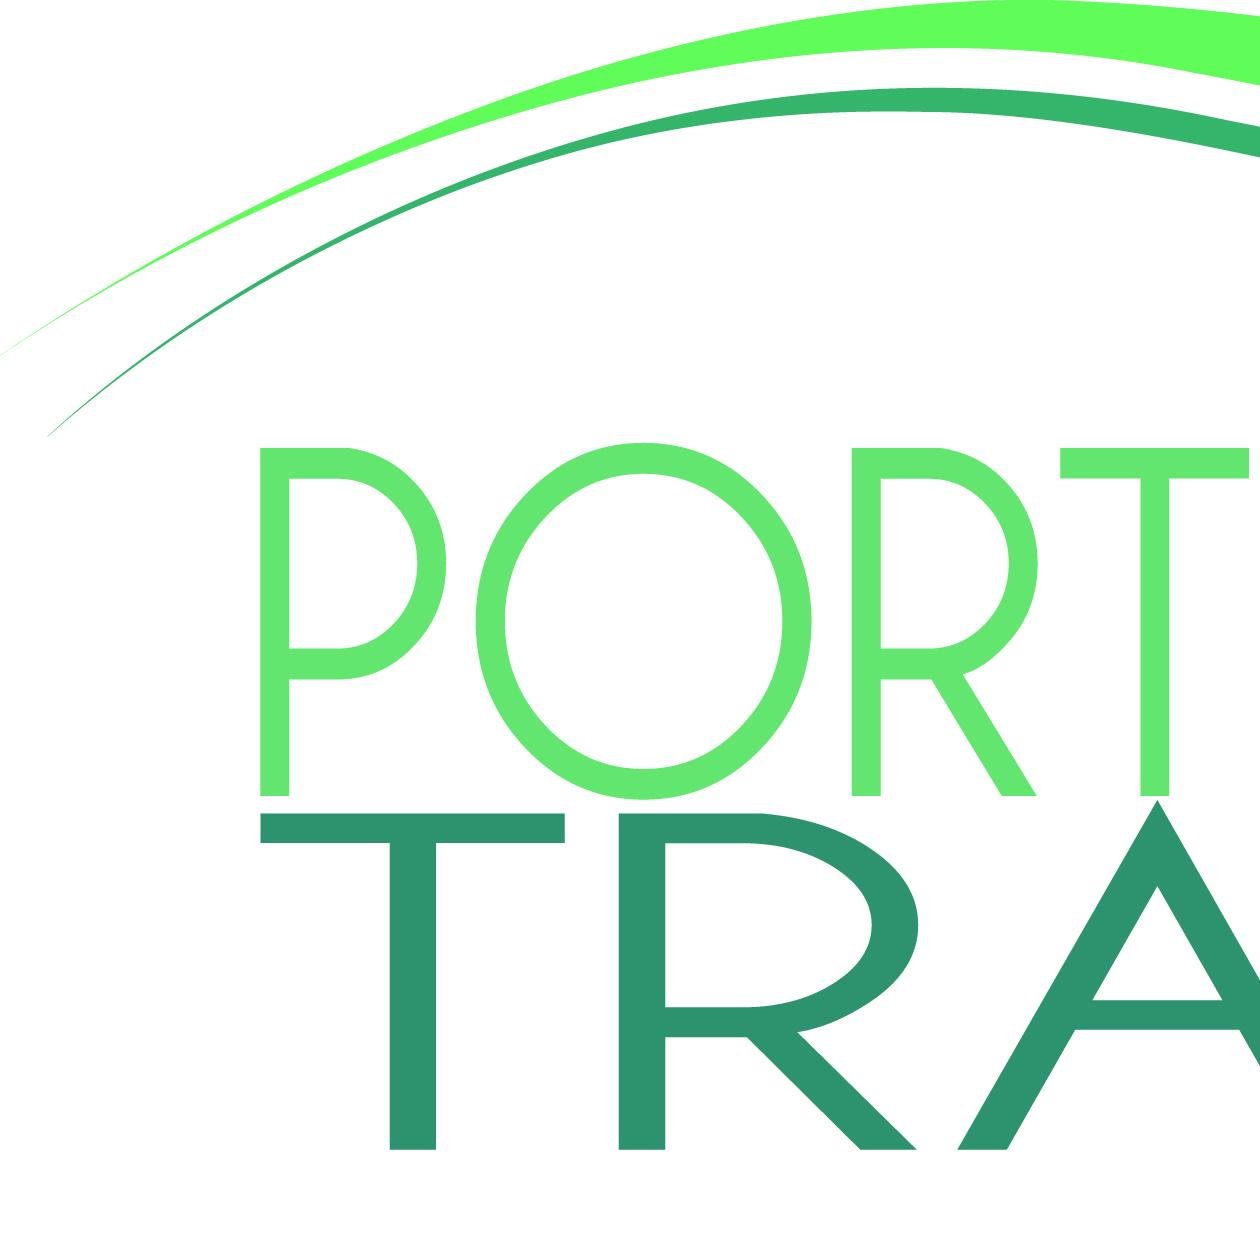 Porterville Transit is a pubic transit agency, providing services to Porterville, CA and the Tule River Indian Reservation.